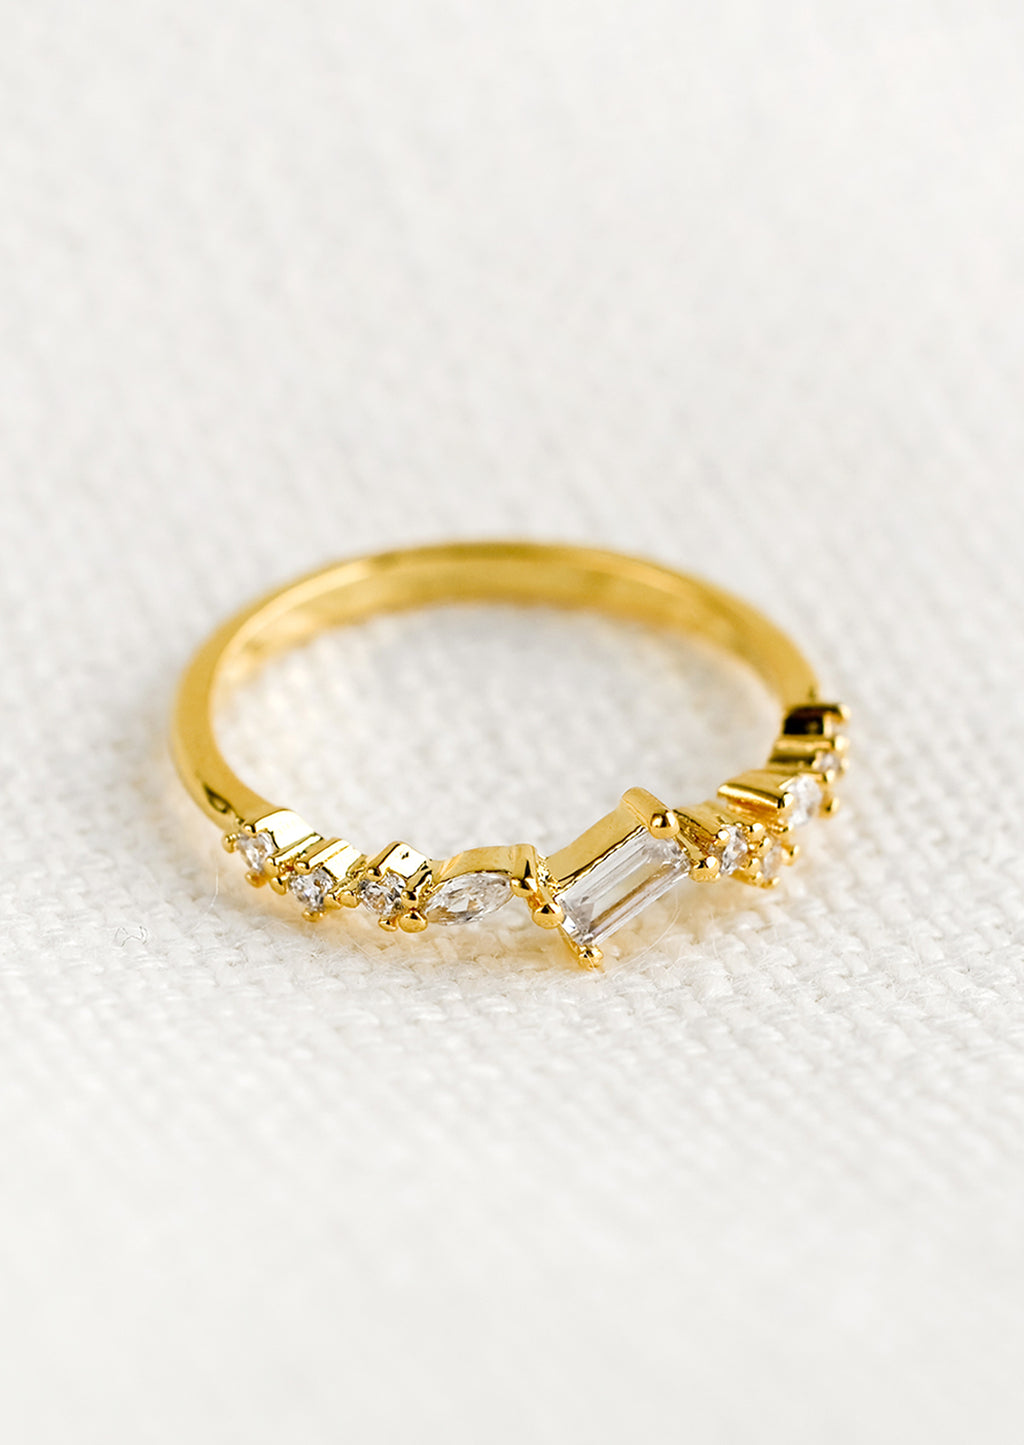 1: A gold ring with askew clear crystals in mixed cuts.